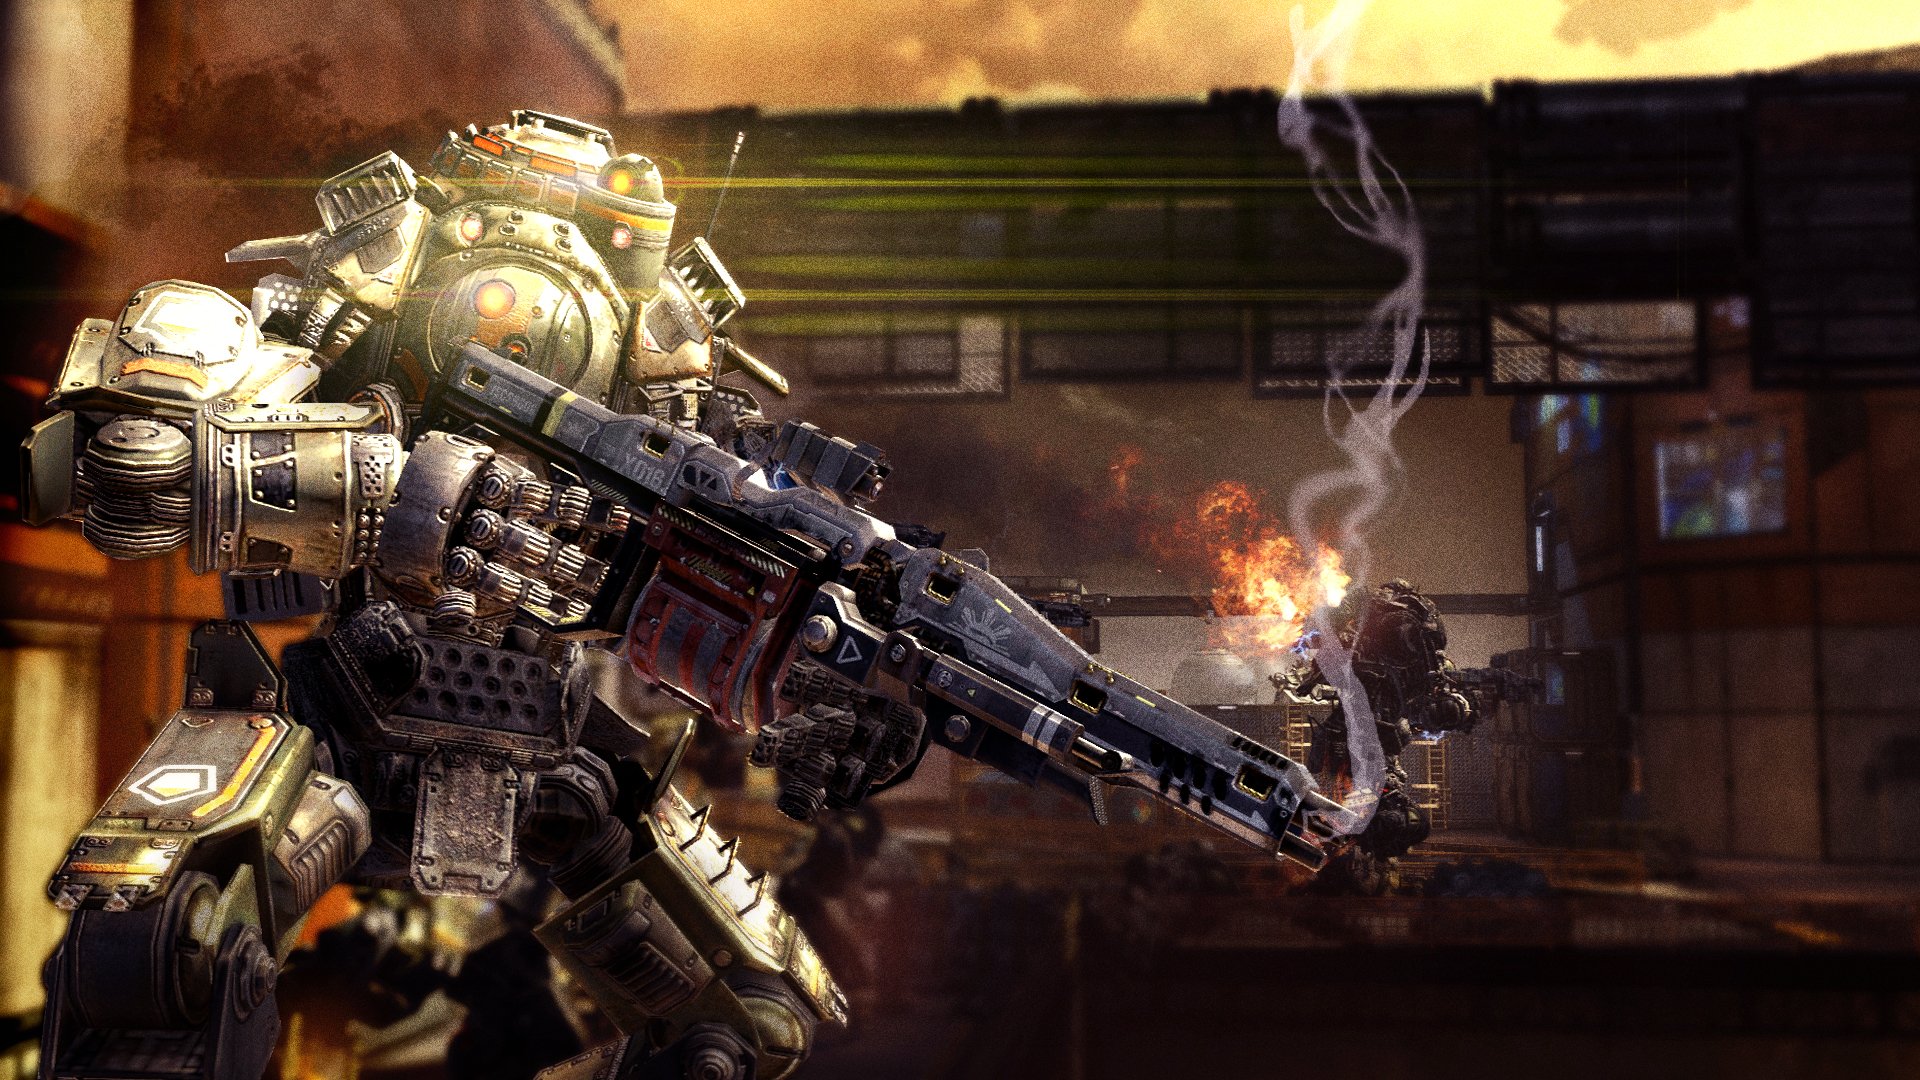 titanfall, Shooter, Fps, Action, Futuristic, Online, Mmo, 1titanfall, Fighting, Apocalyptic, Warrior, Weapon, Gun, Mecha, Mech Wallpaper